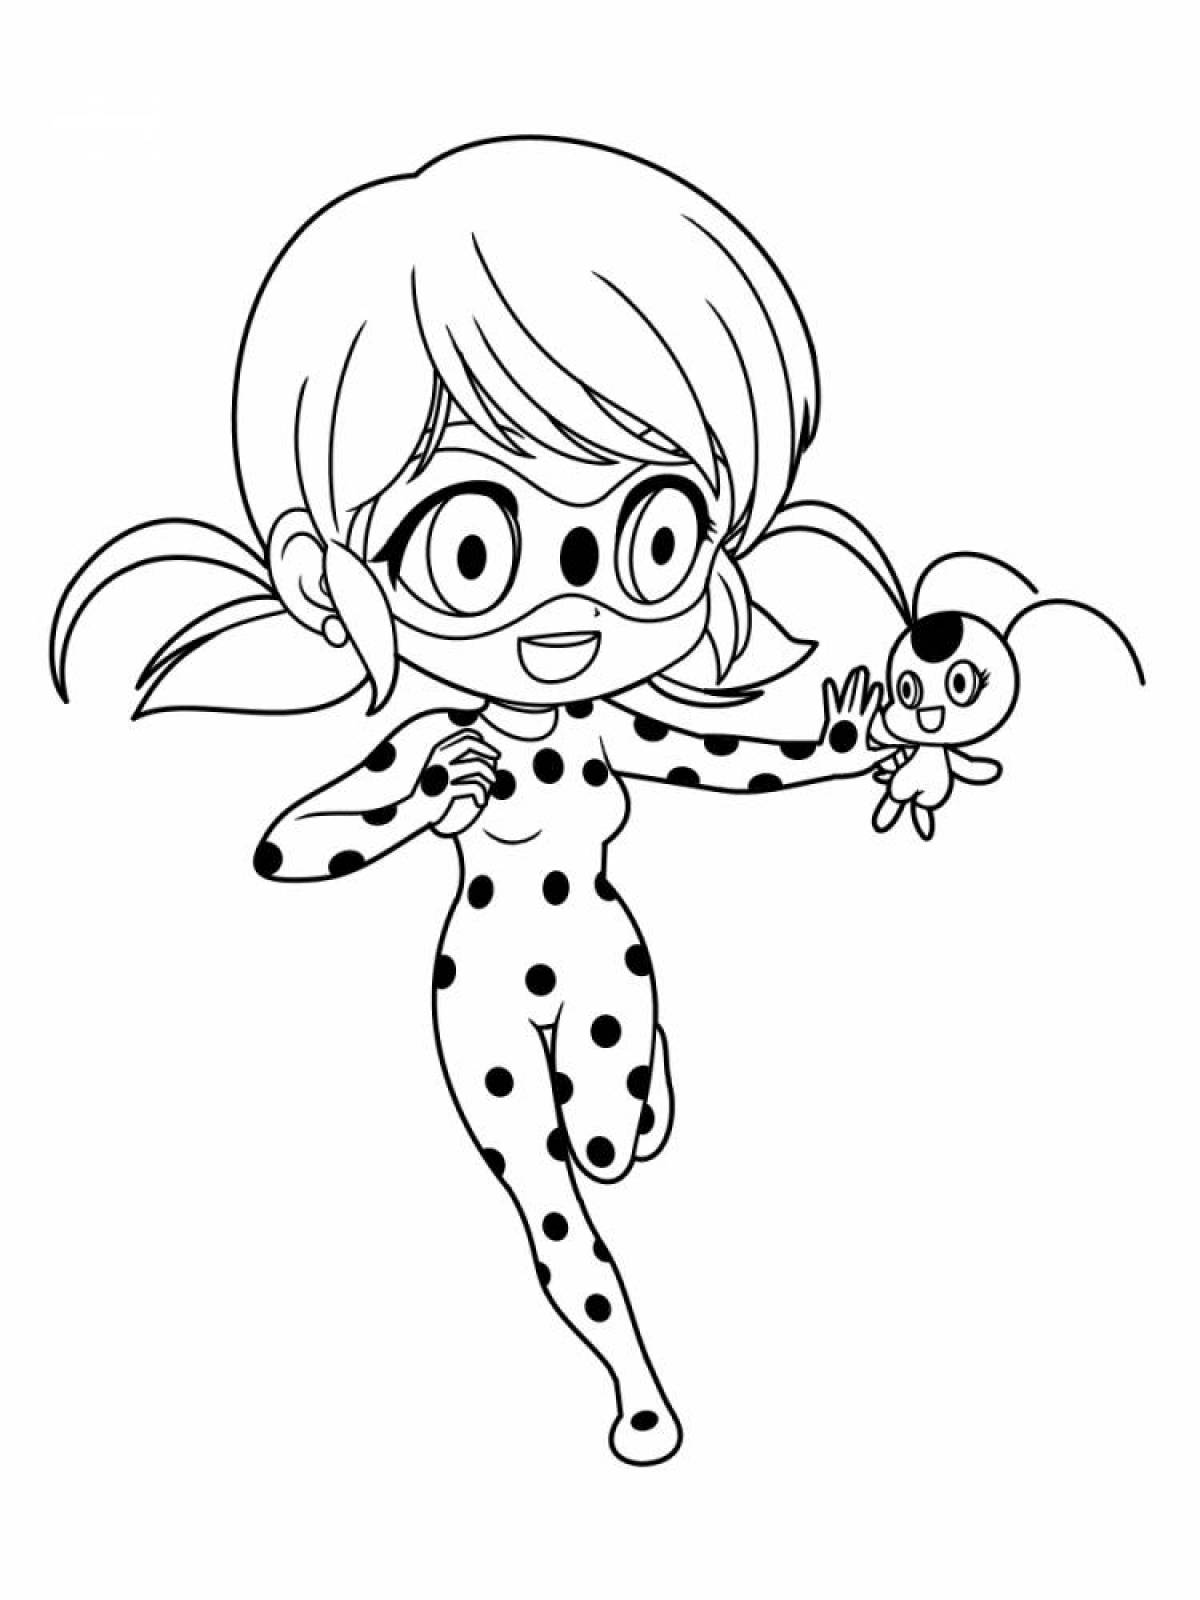 Adorable ladybug and super cat coloring pages for kids